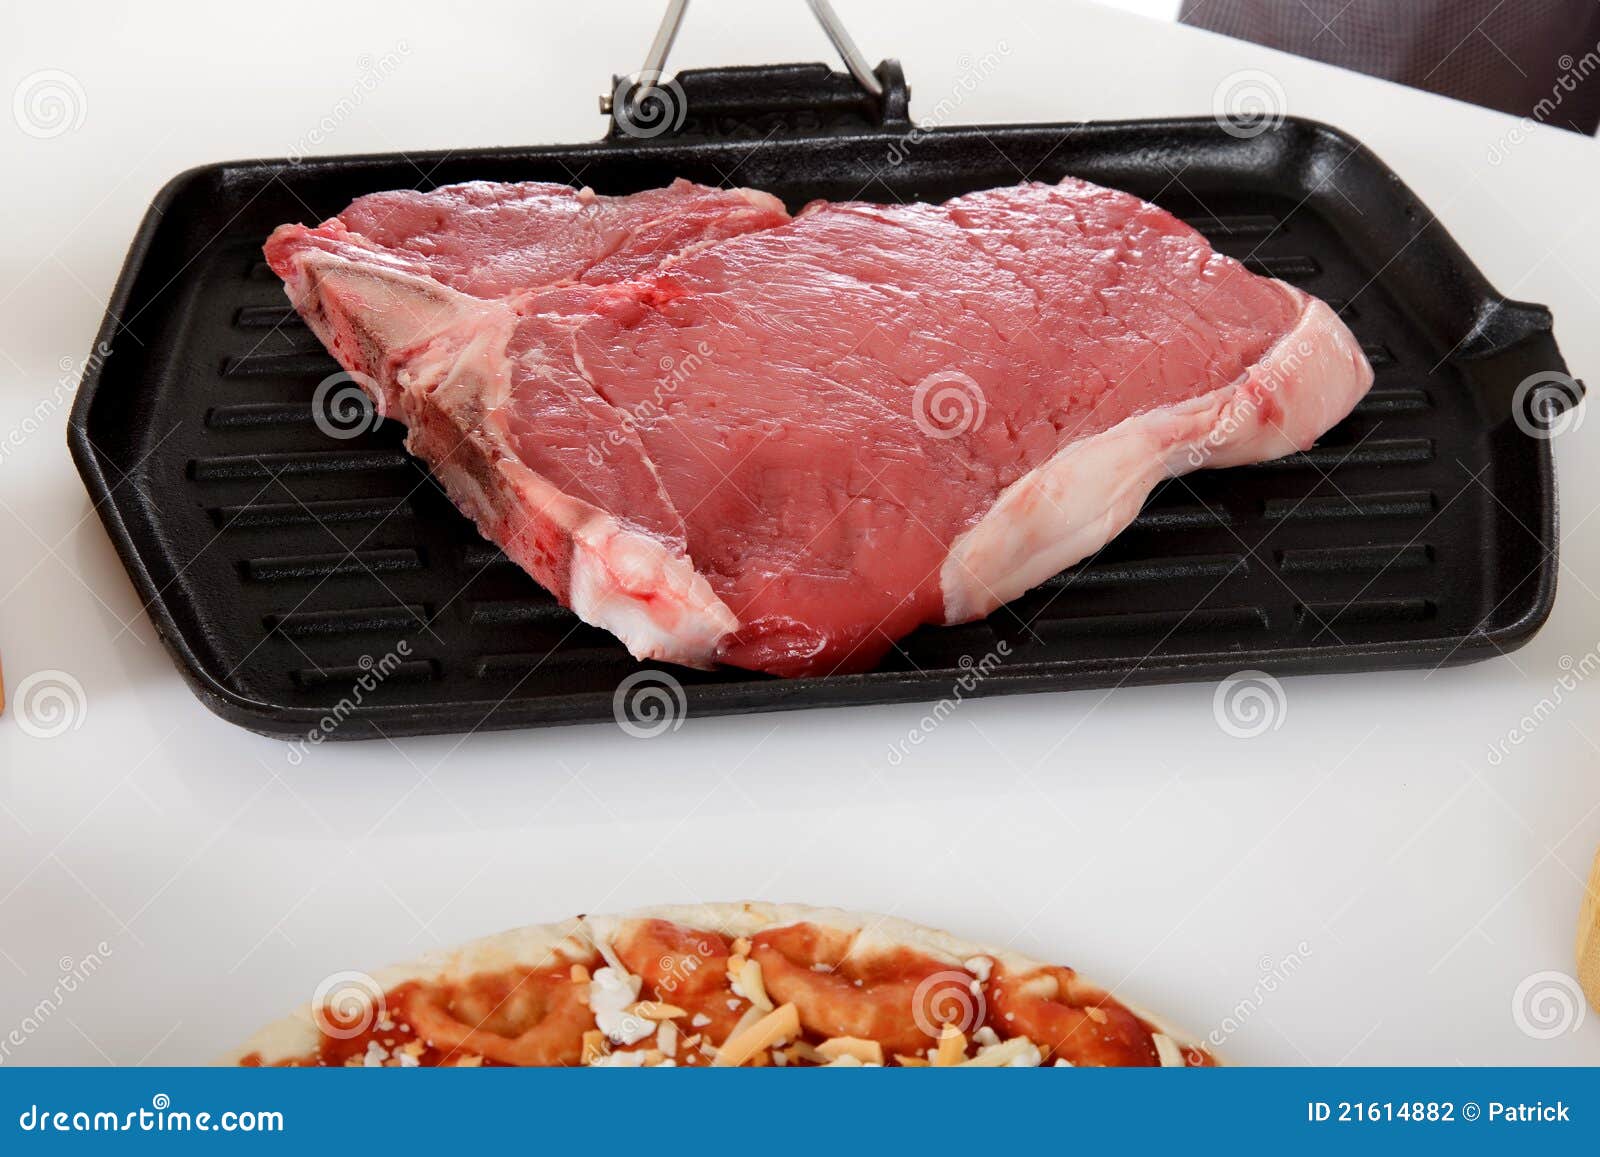 Uncooked steak on grill. stock photo. Image of surface - 21614882